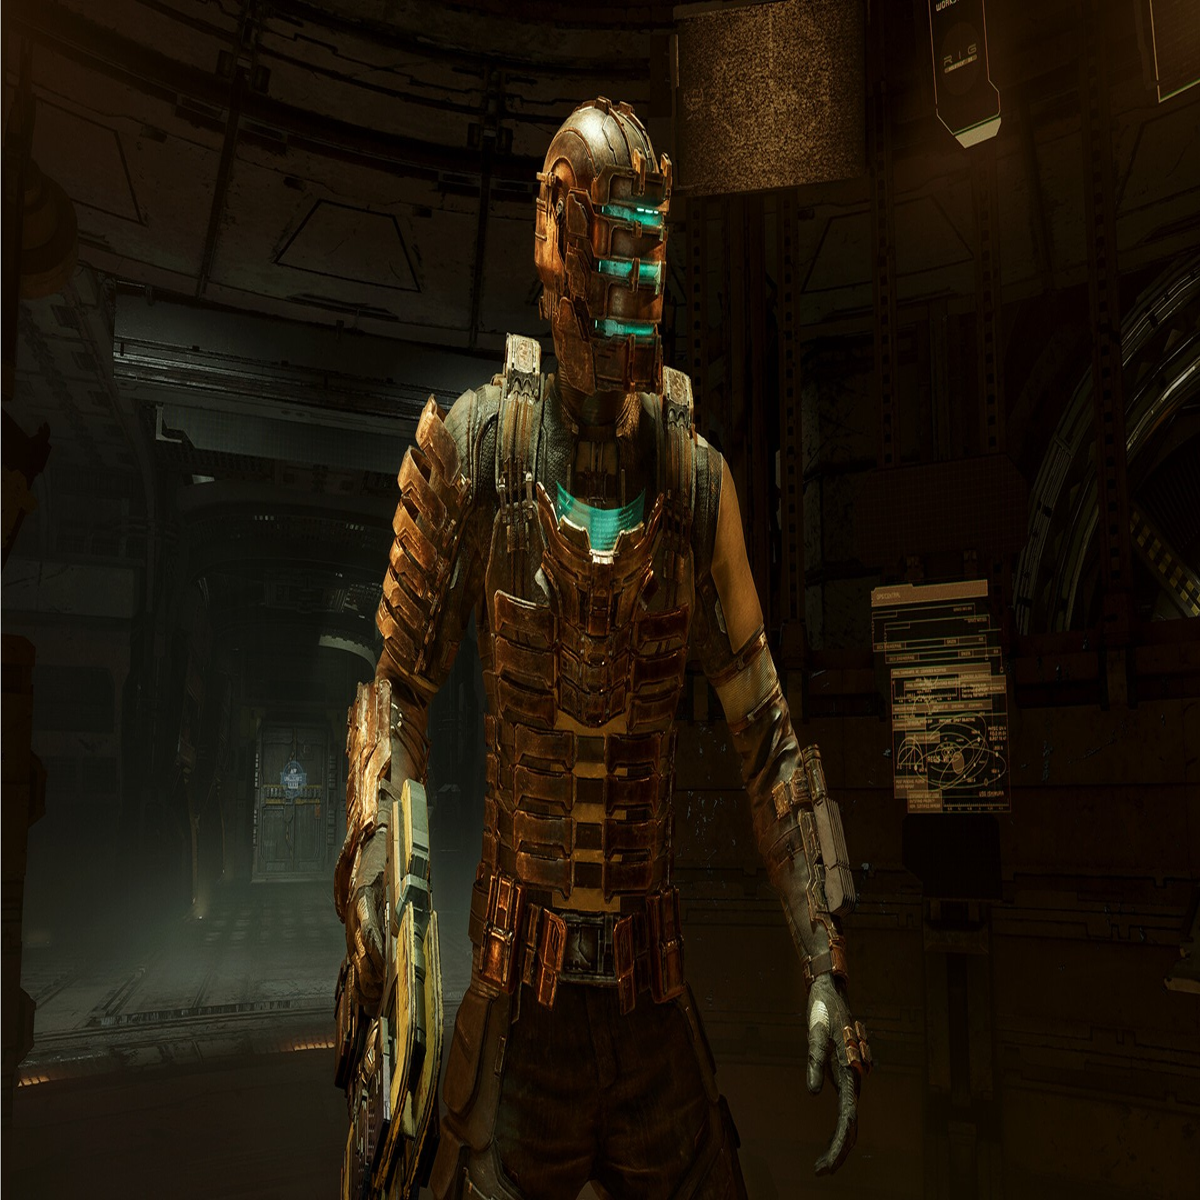 Dead Space Remake Player Points Out Hidden Reference to Dead Space 3